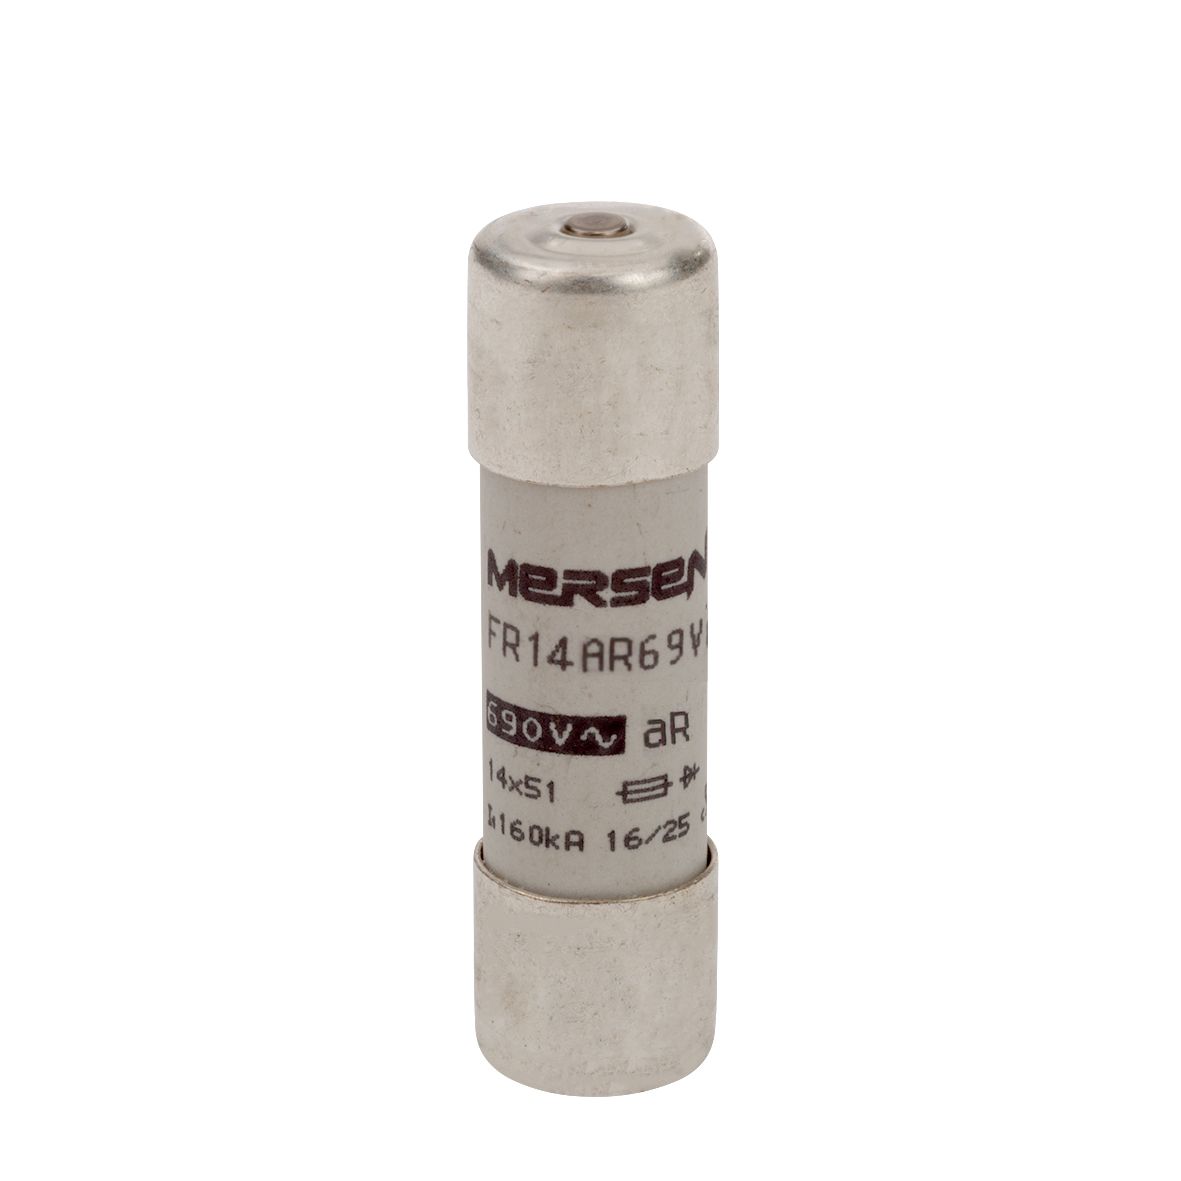 A1056666 - Cylindrical fuse-link aR 690VAC 14x51, 63A, with indicator